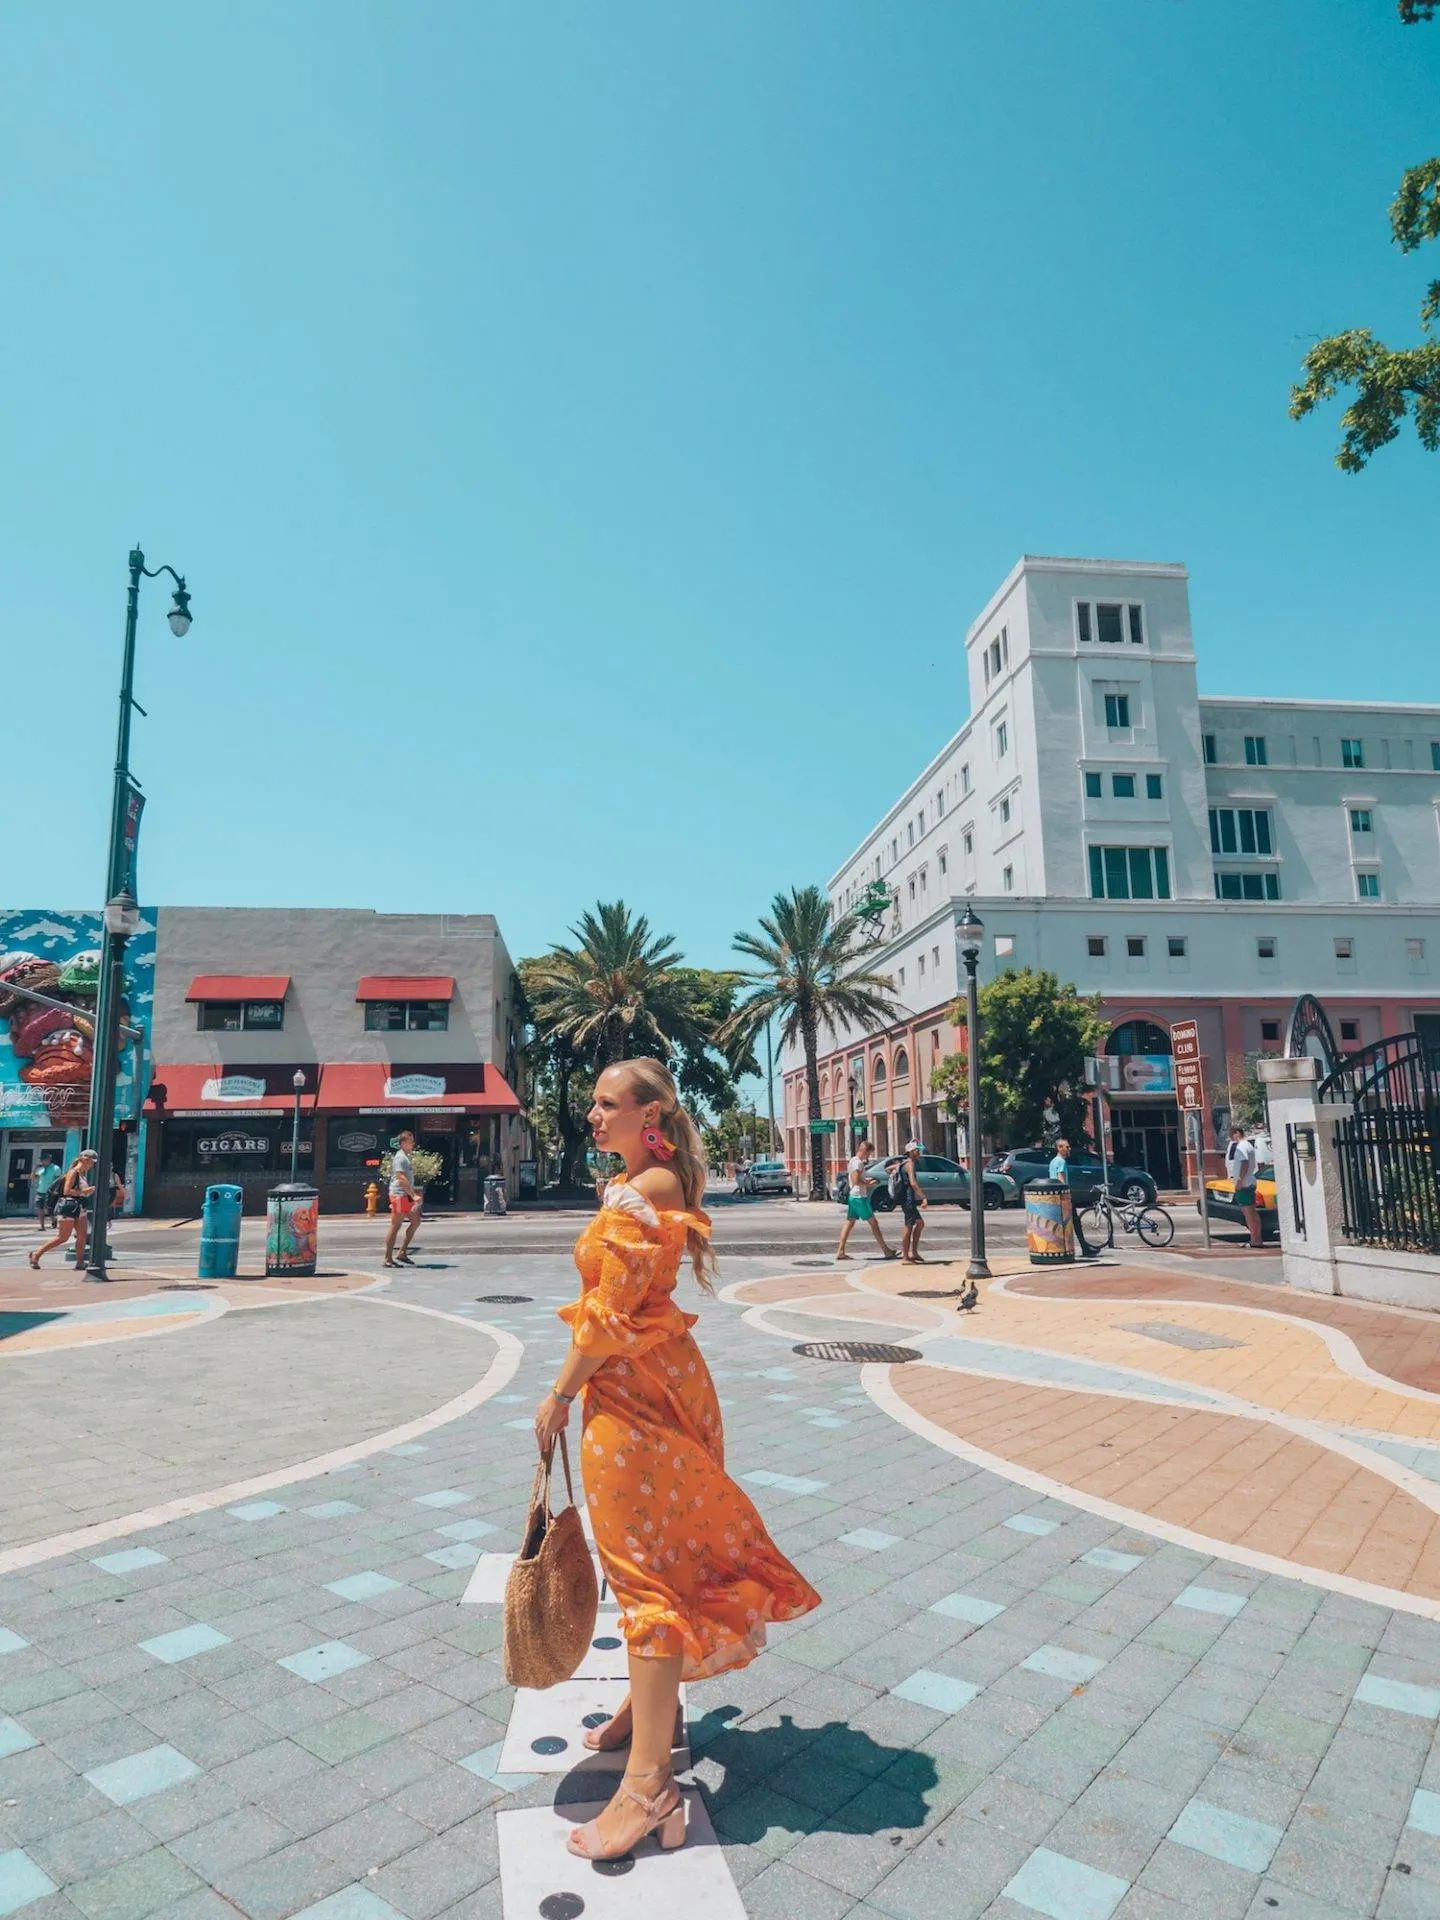 How to spend 1 perfect day in Little Havana, Miami. A complete guide on what to see and do, which restaurants to dine at, bars to visit, Cuban treats to try and more. If you're headed to Little Havana for the day you'll definitely want to read this guide! 